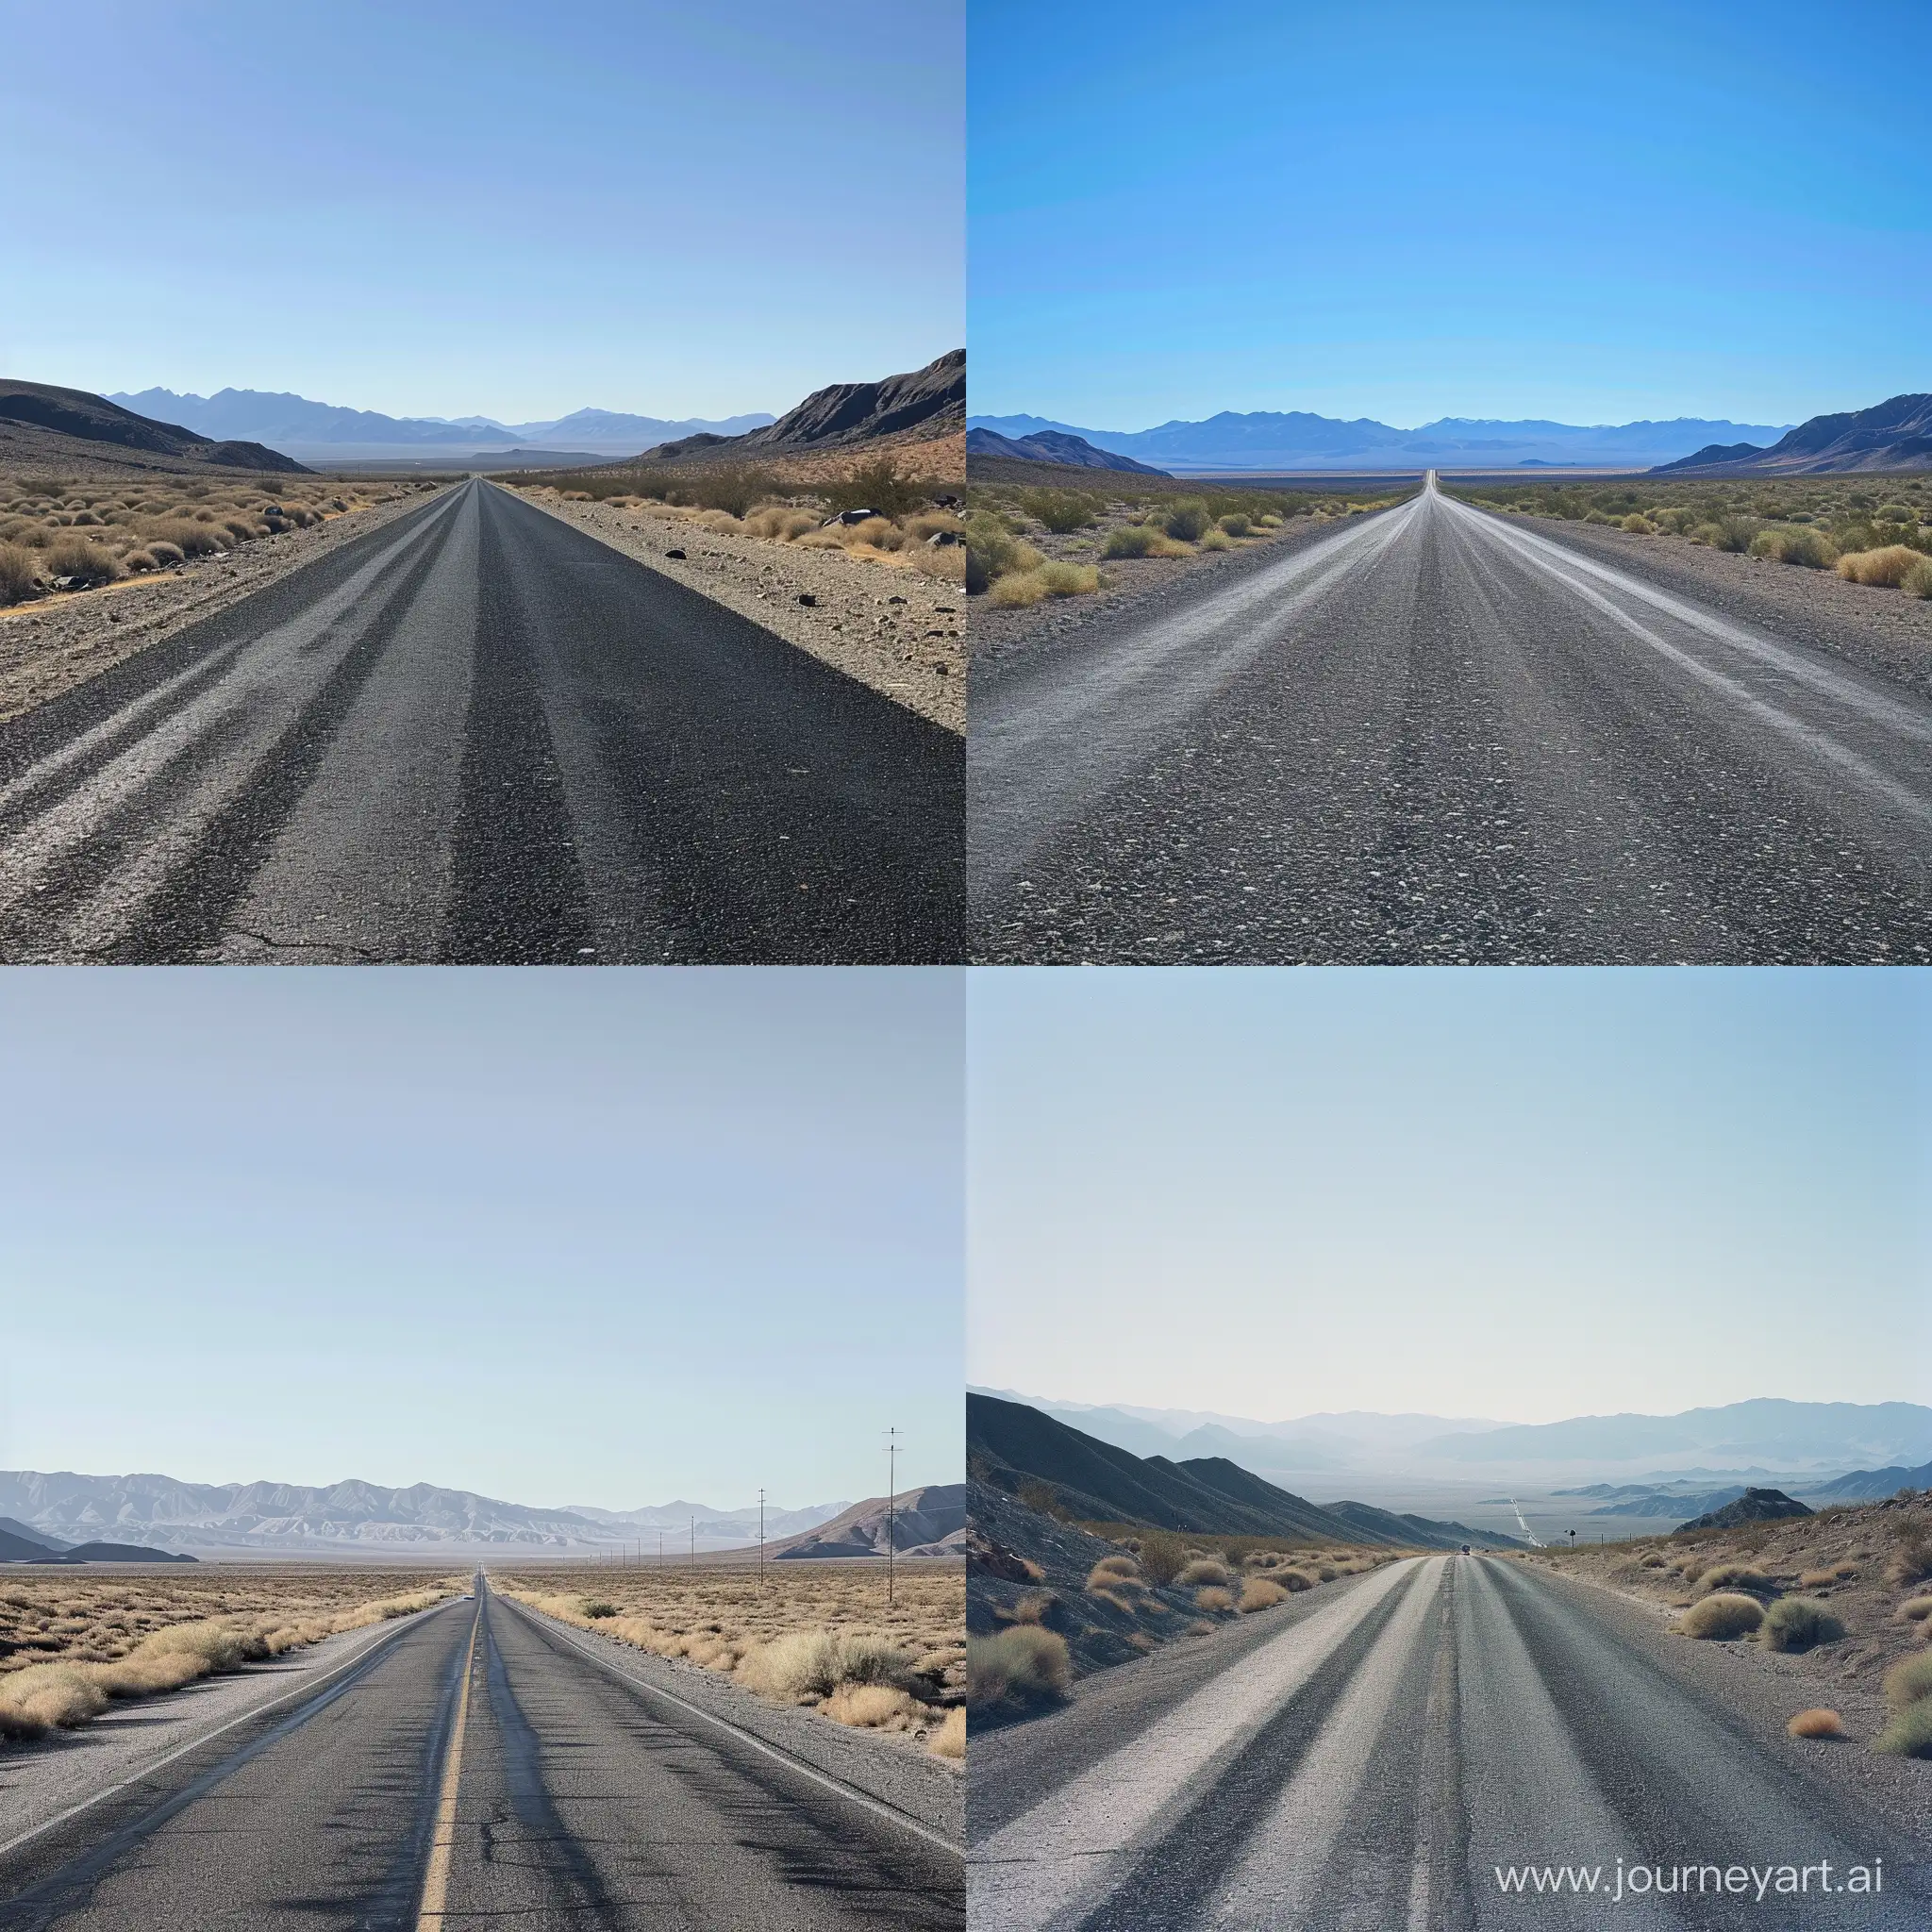 a 300km narrow road in nevada, there are almost no cars on that road, mountains can be seen far away, the sky is clear
